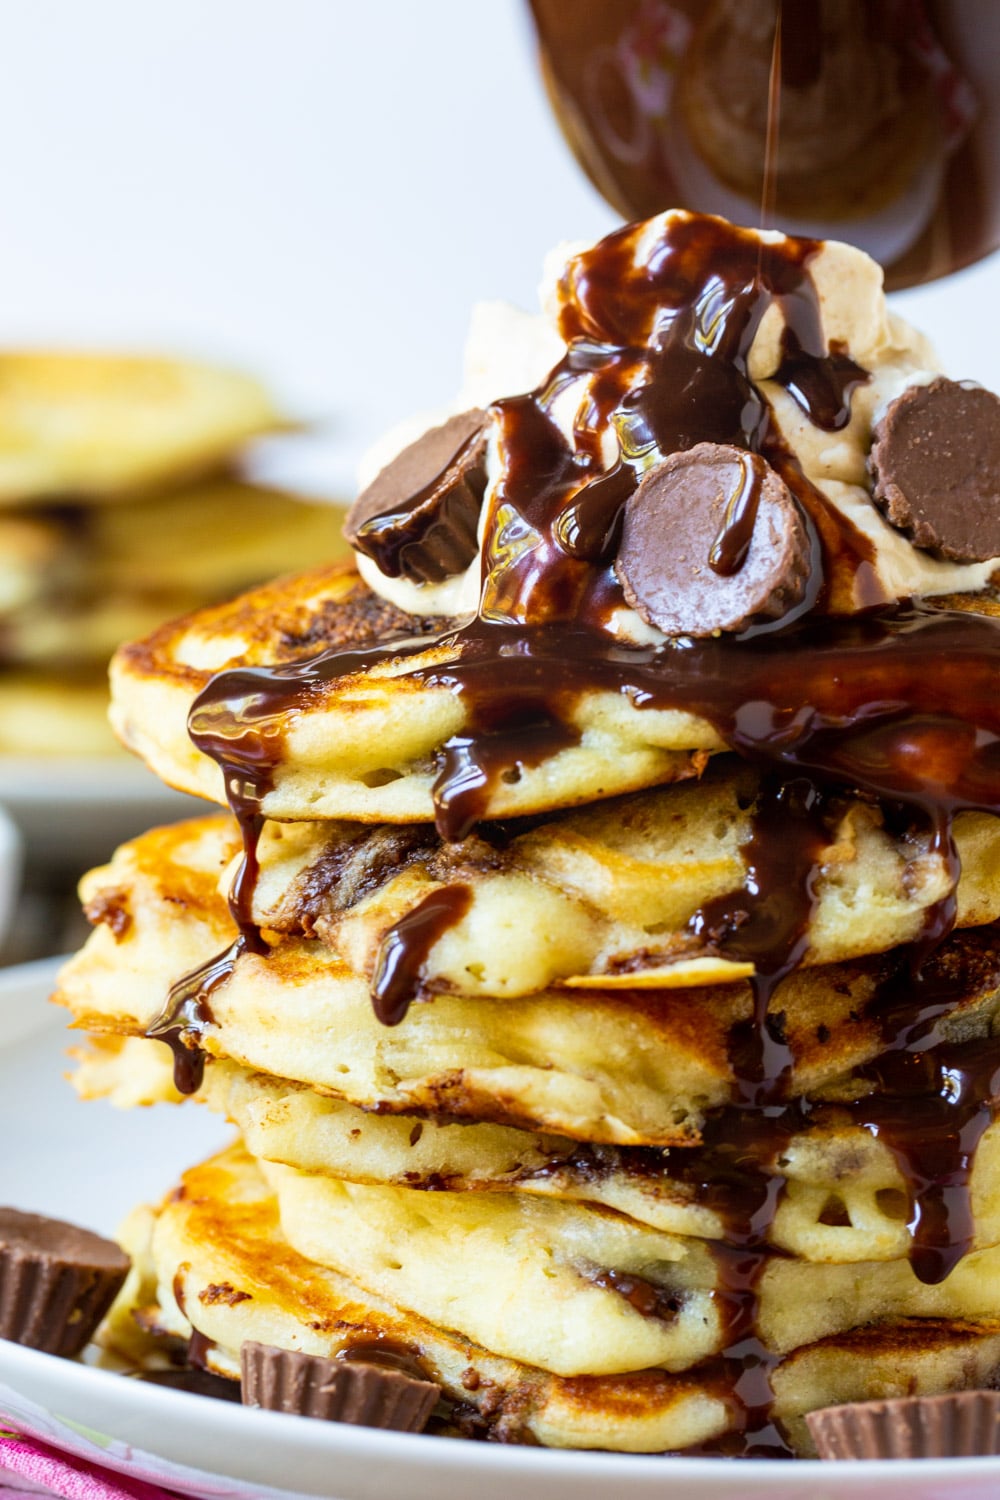 Chocolate syrup drizzling down stack of pancakes.